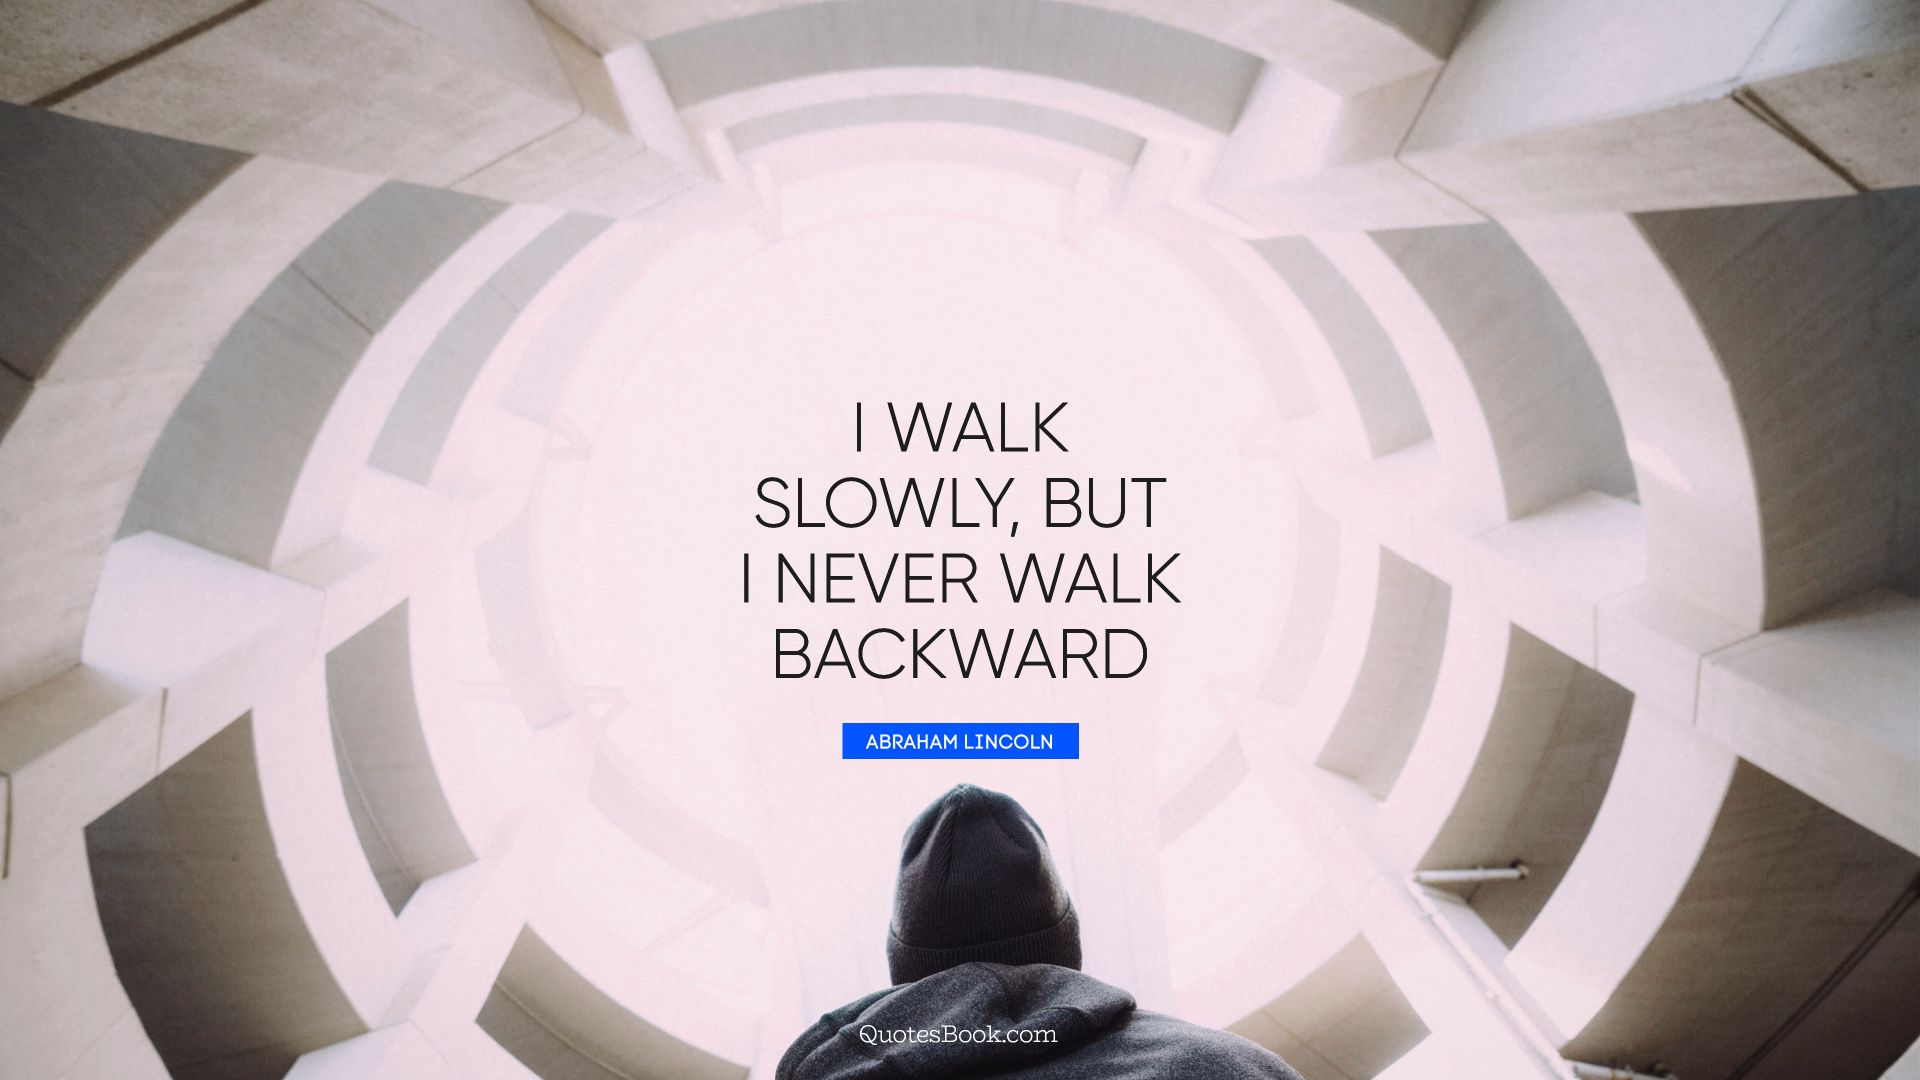 I walk slowly, but I never walk backward. - Quote by Abraham Lincoln